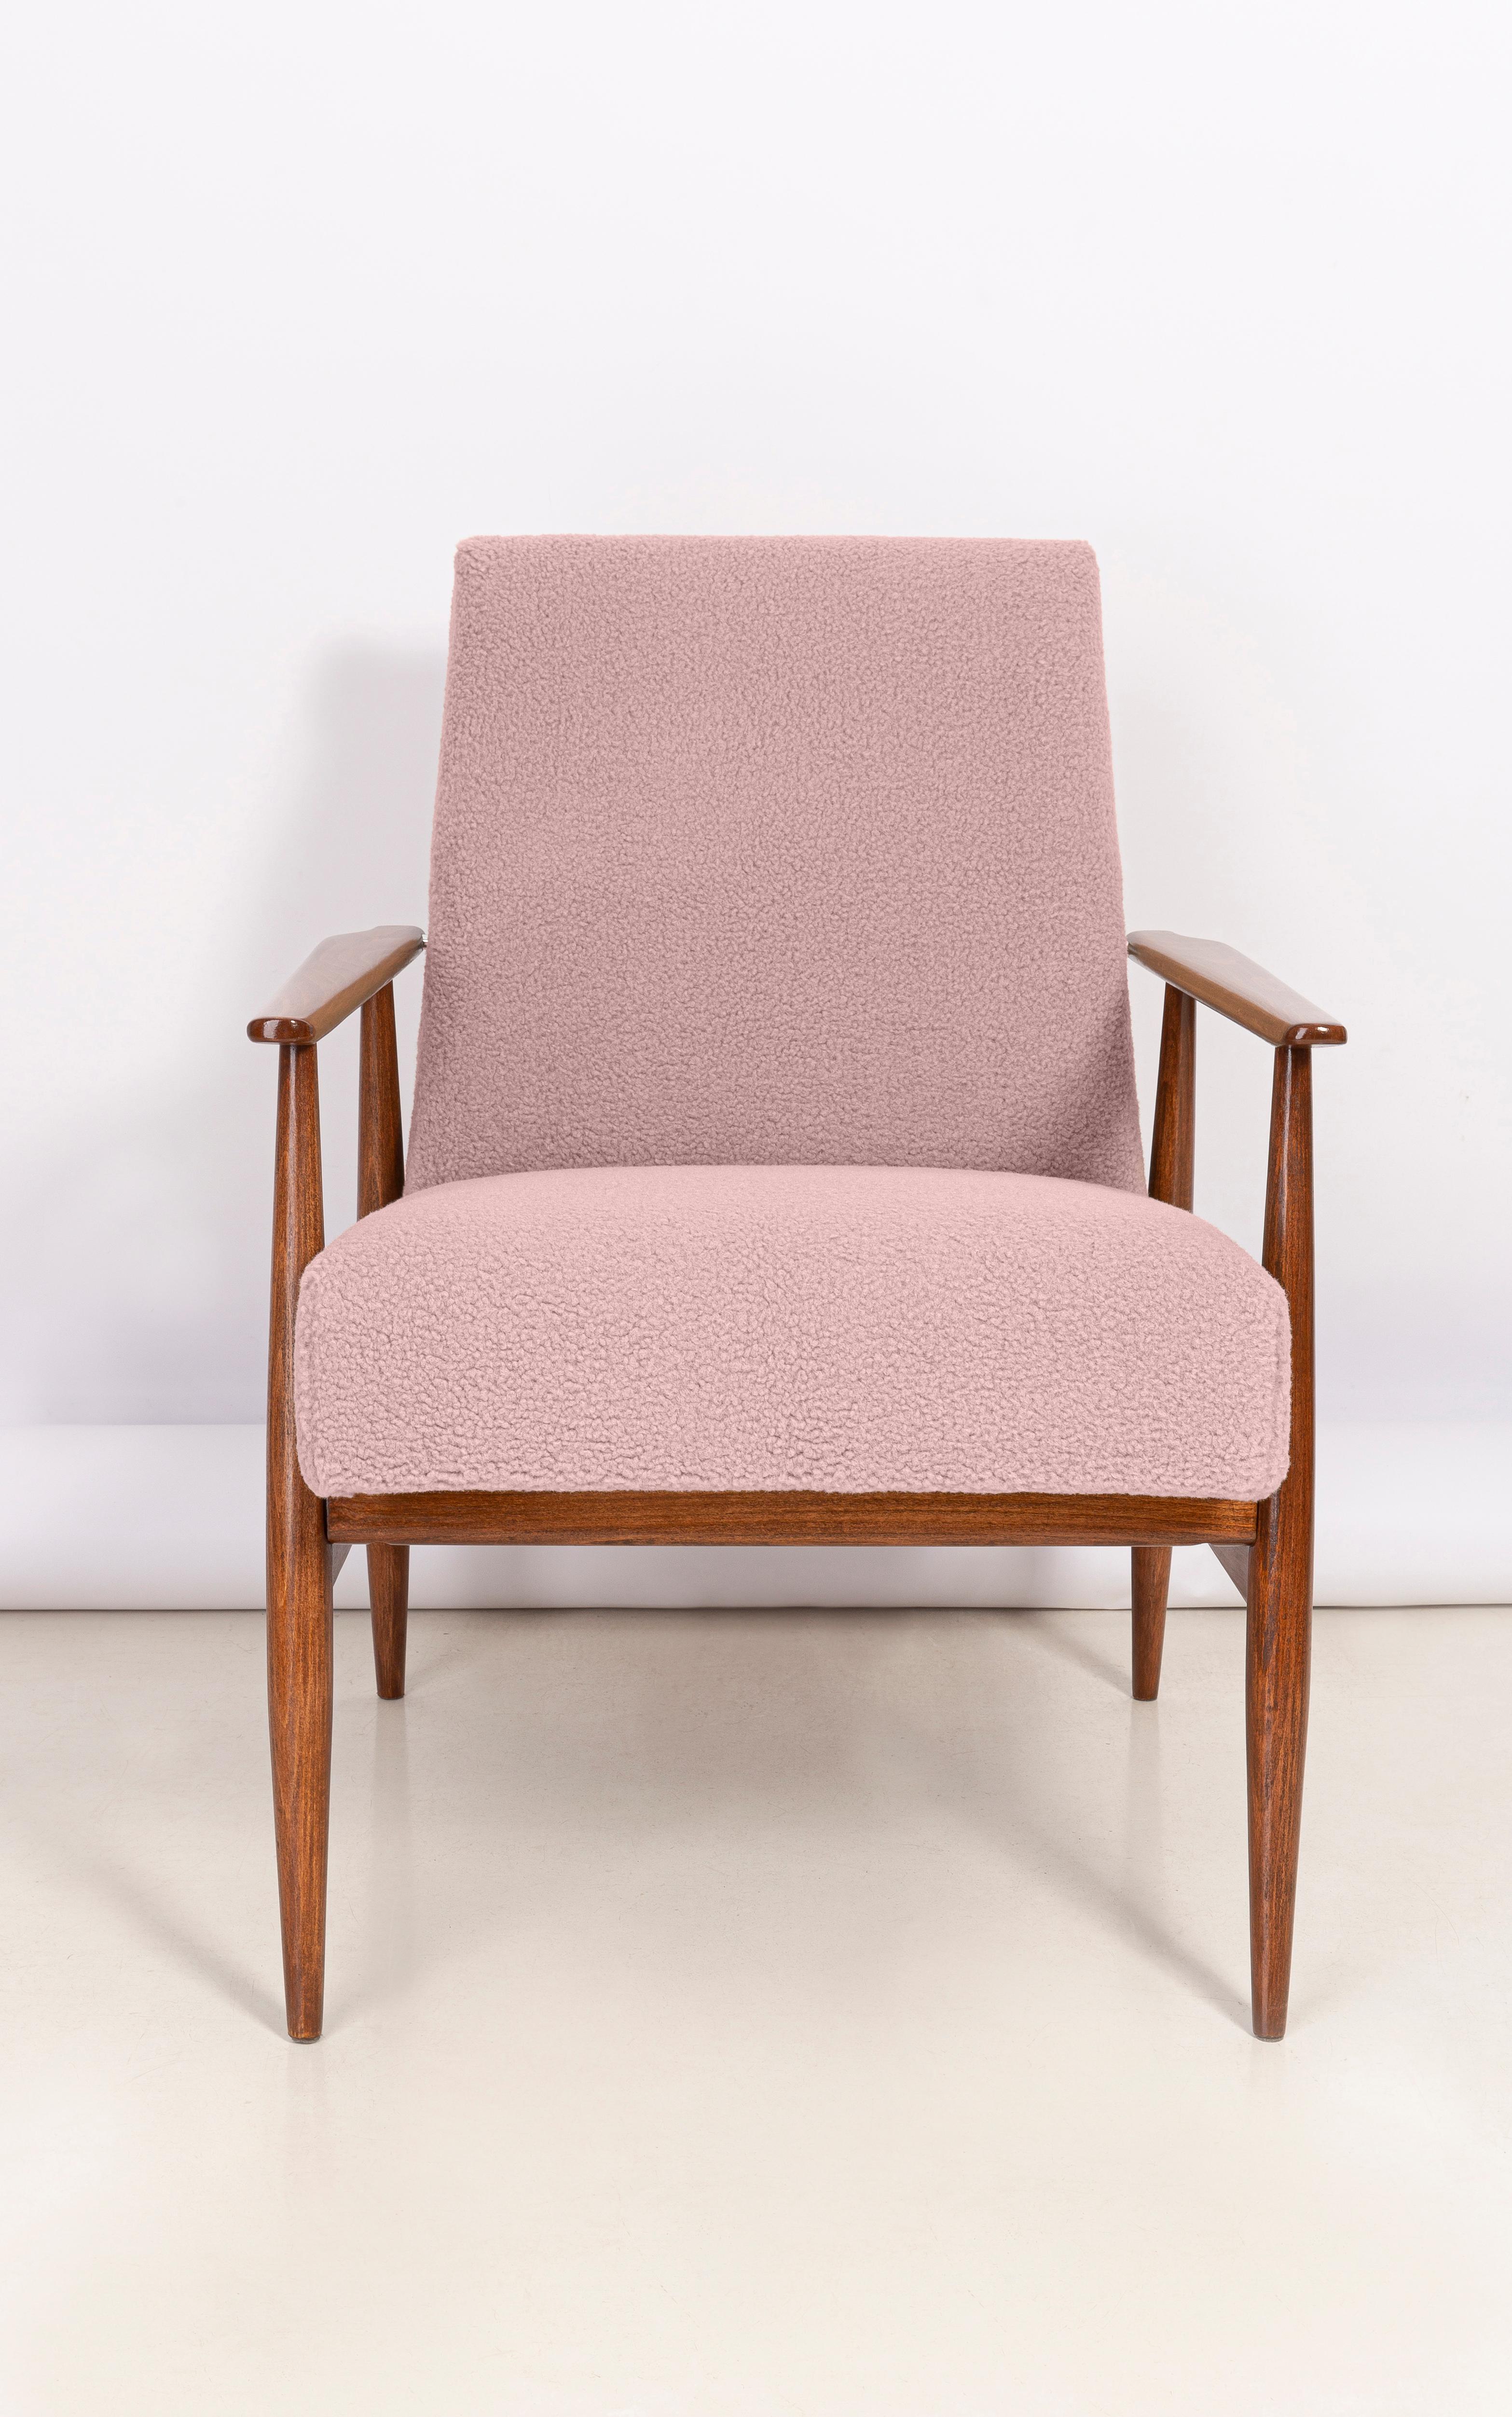 Dusty Pink bouclé armchair, designed by Henryk Lis. Furniture after full carpentry and upholstery renovation. The armchair will be perfect in Minimalist spaces, both private and public. 

Upholstery, faux fur has a structure reminiscent of a